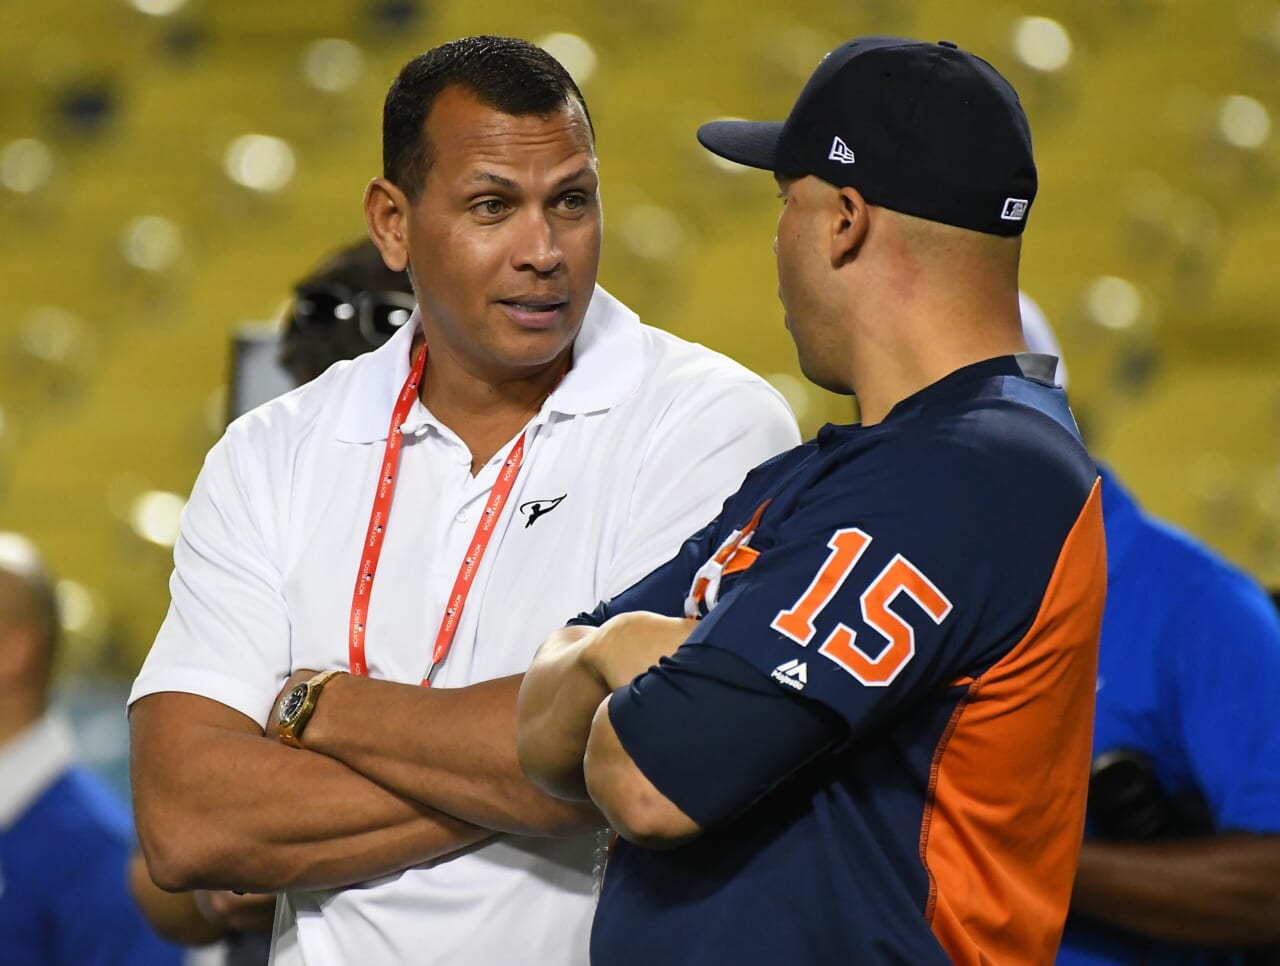 Why Should New York Yankees Fans Treat A-Rod Better?